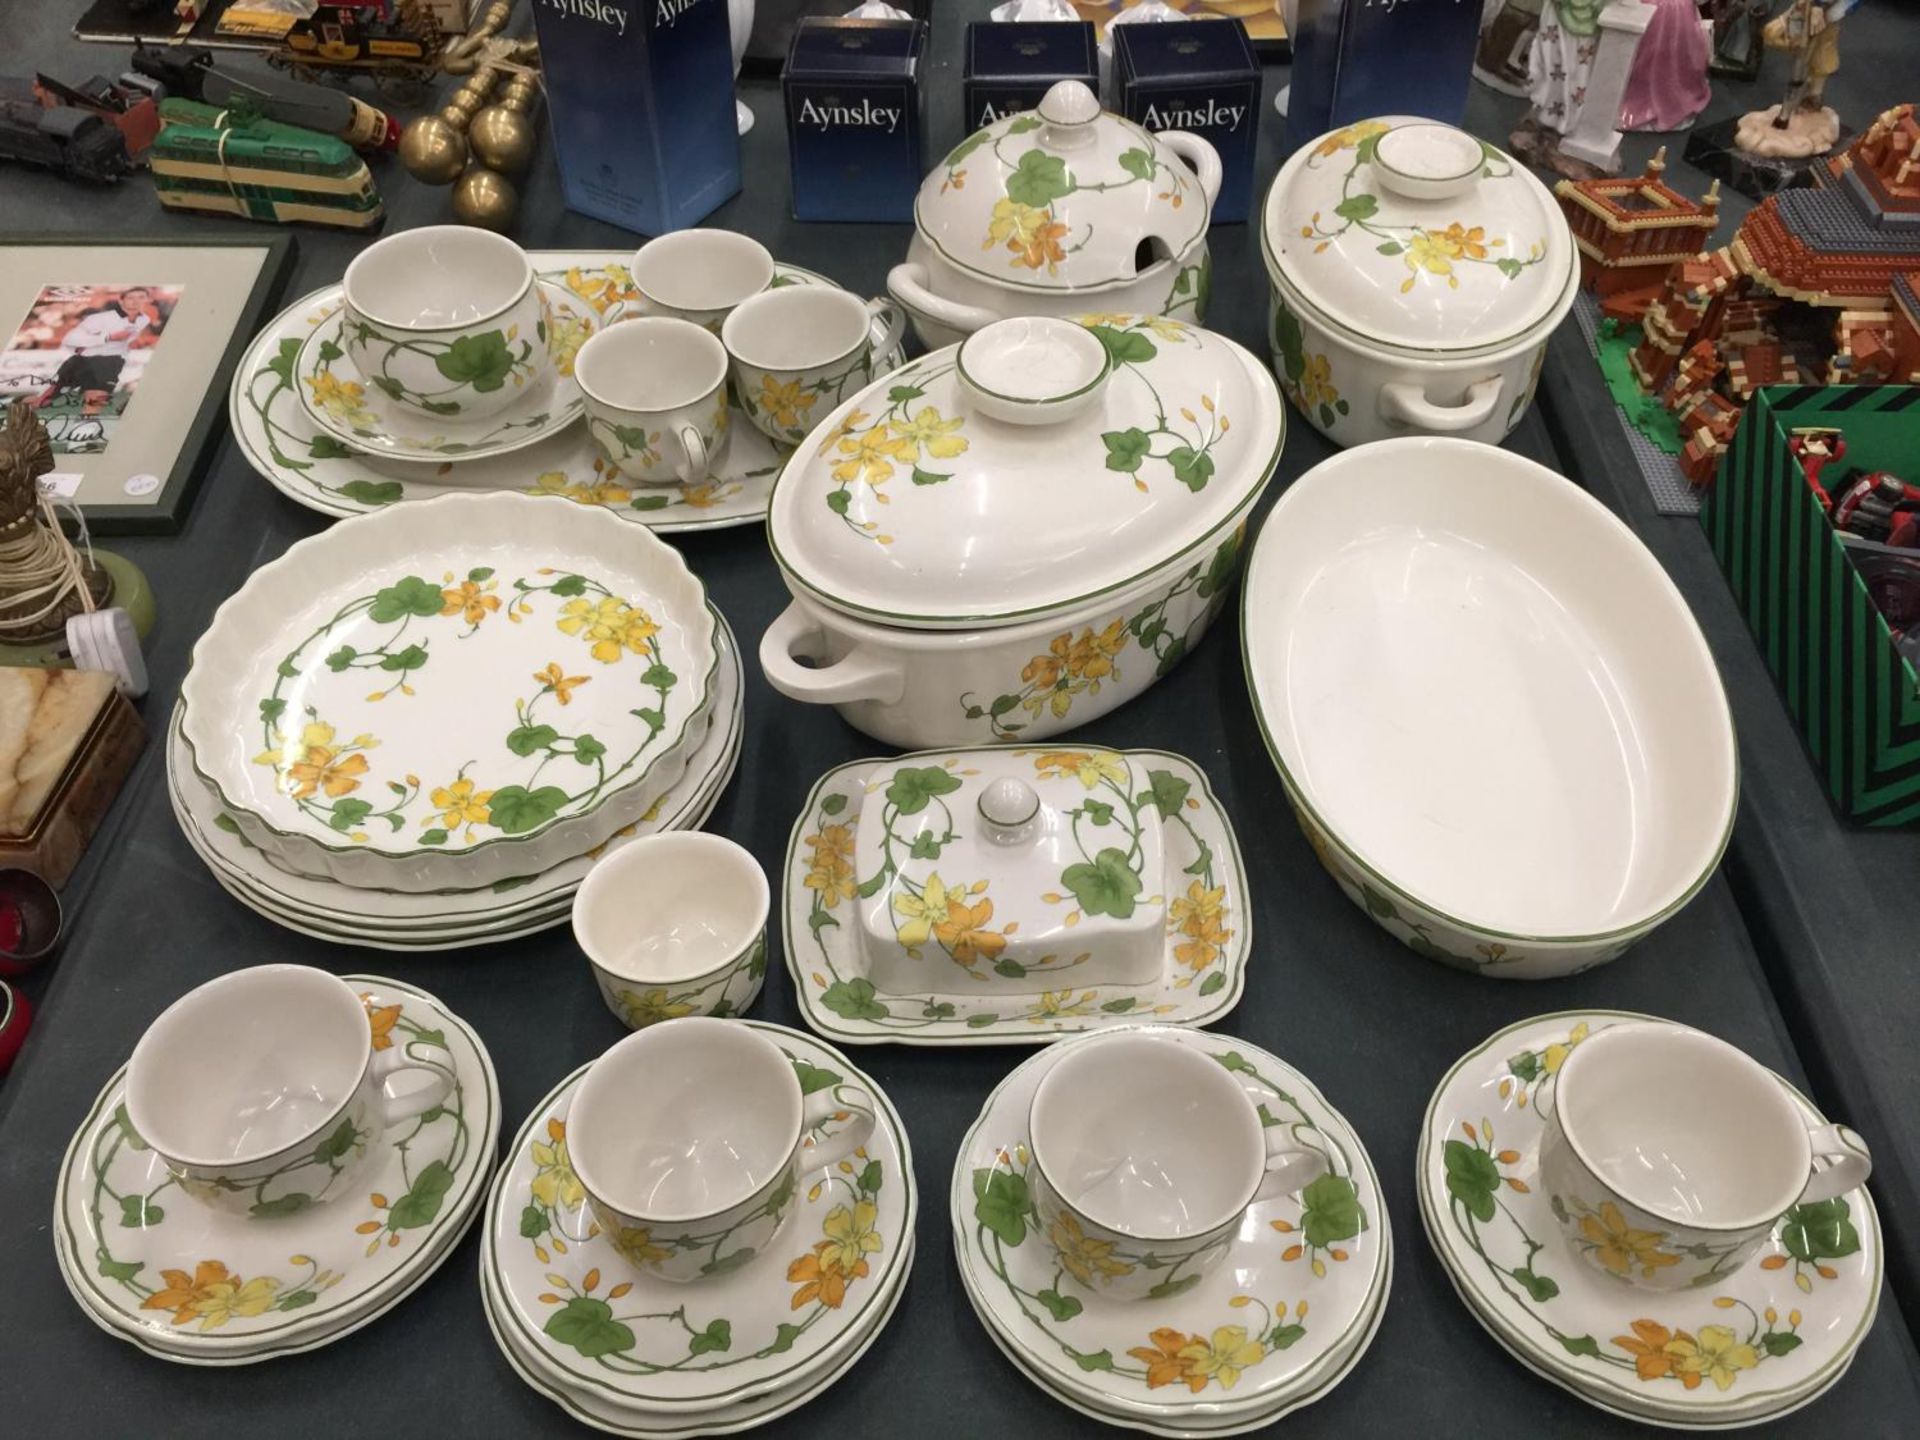 A LARGE QUANTITY OF VILLEROY AND BOCH 'GERANIUM' DINNERWARE TO INCLUDE PLATES, CUPS, SAUCERS,